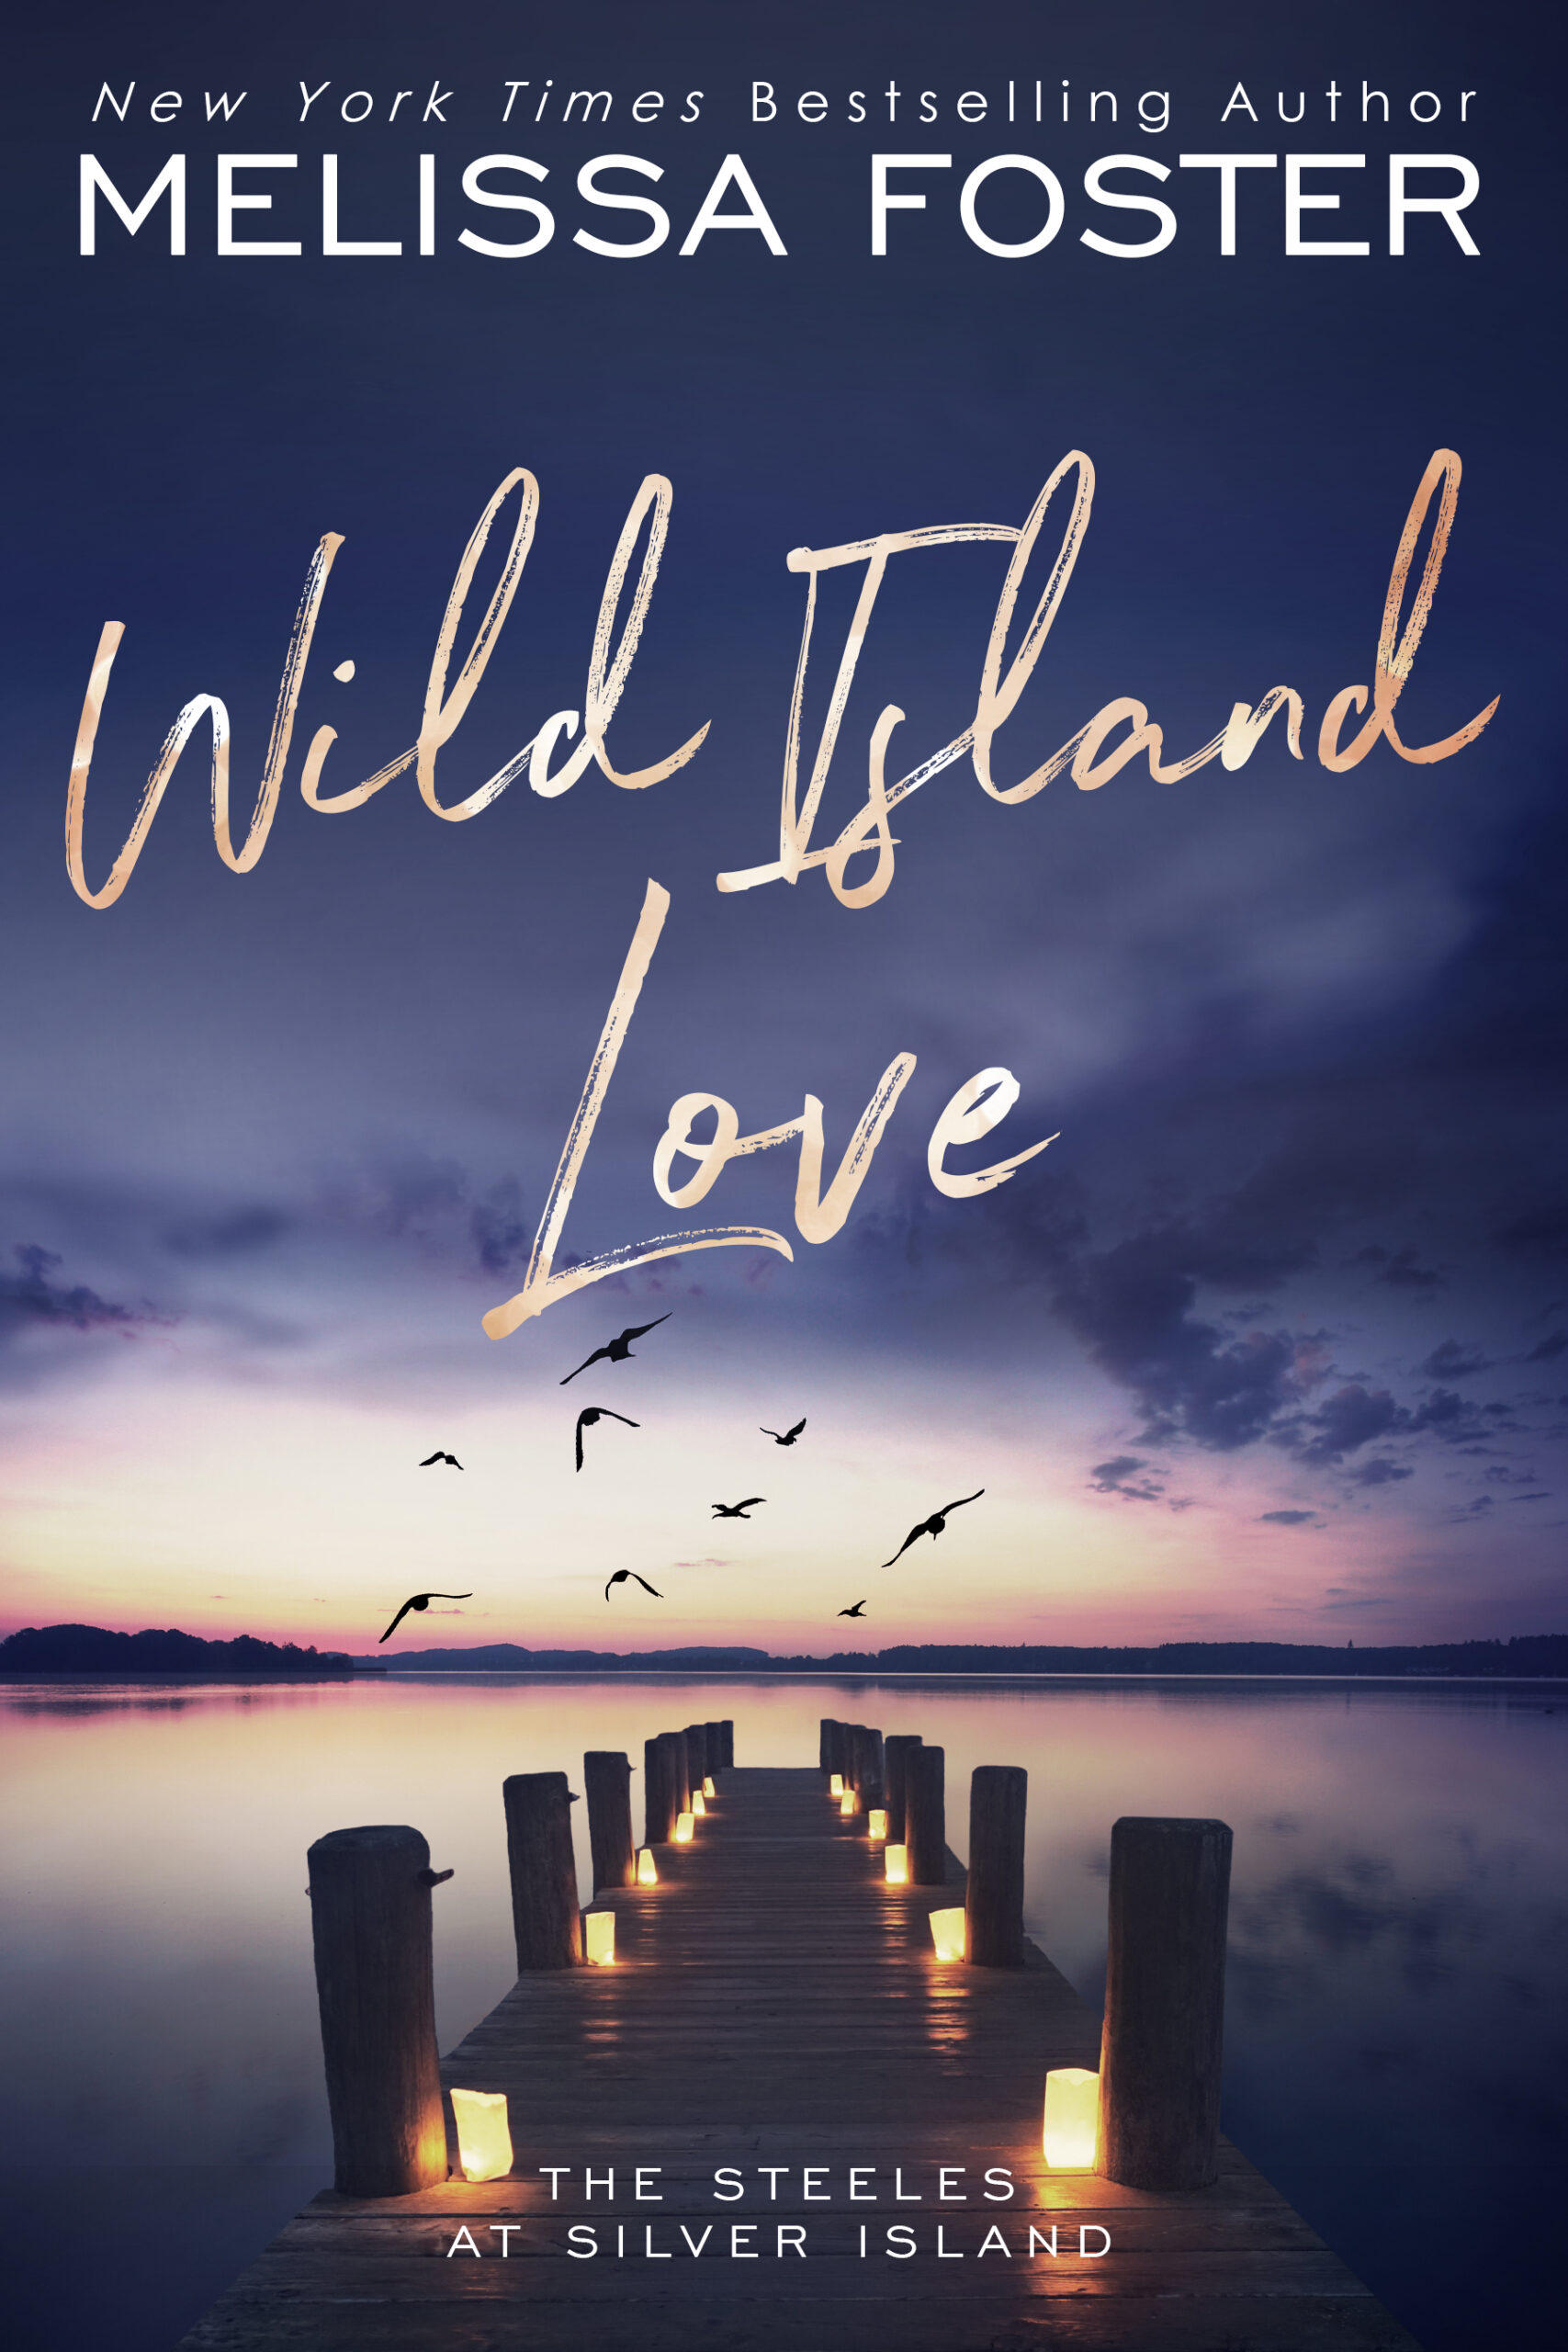 Wild Island Love Special Edition Paperback by Melissa Foster